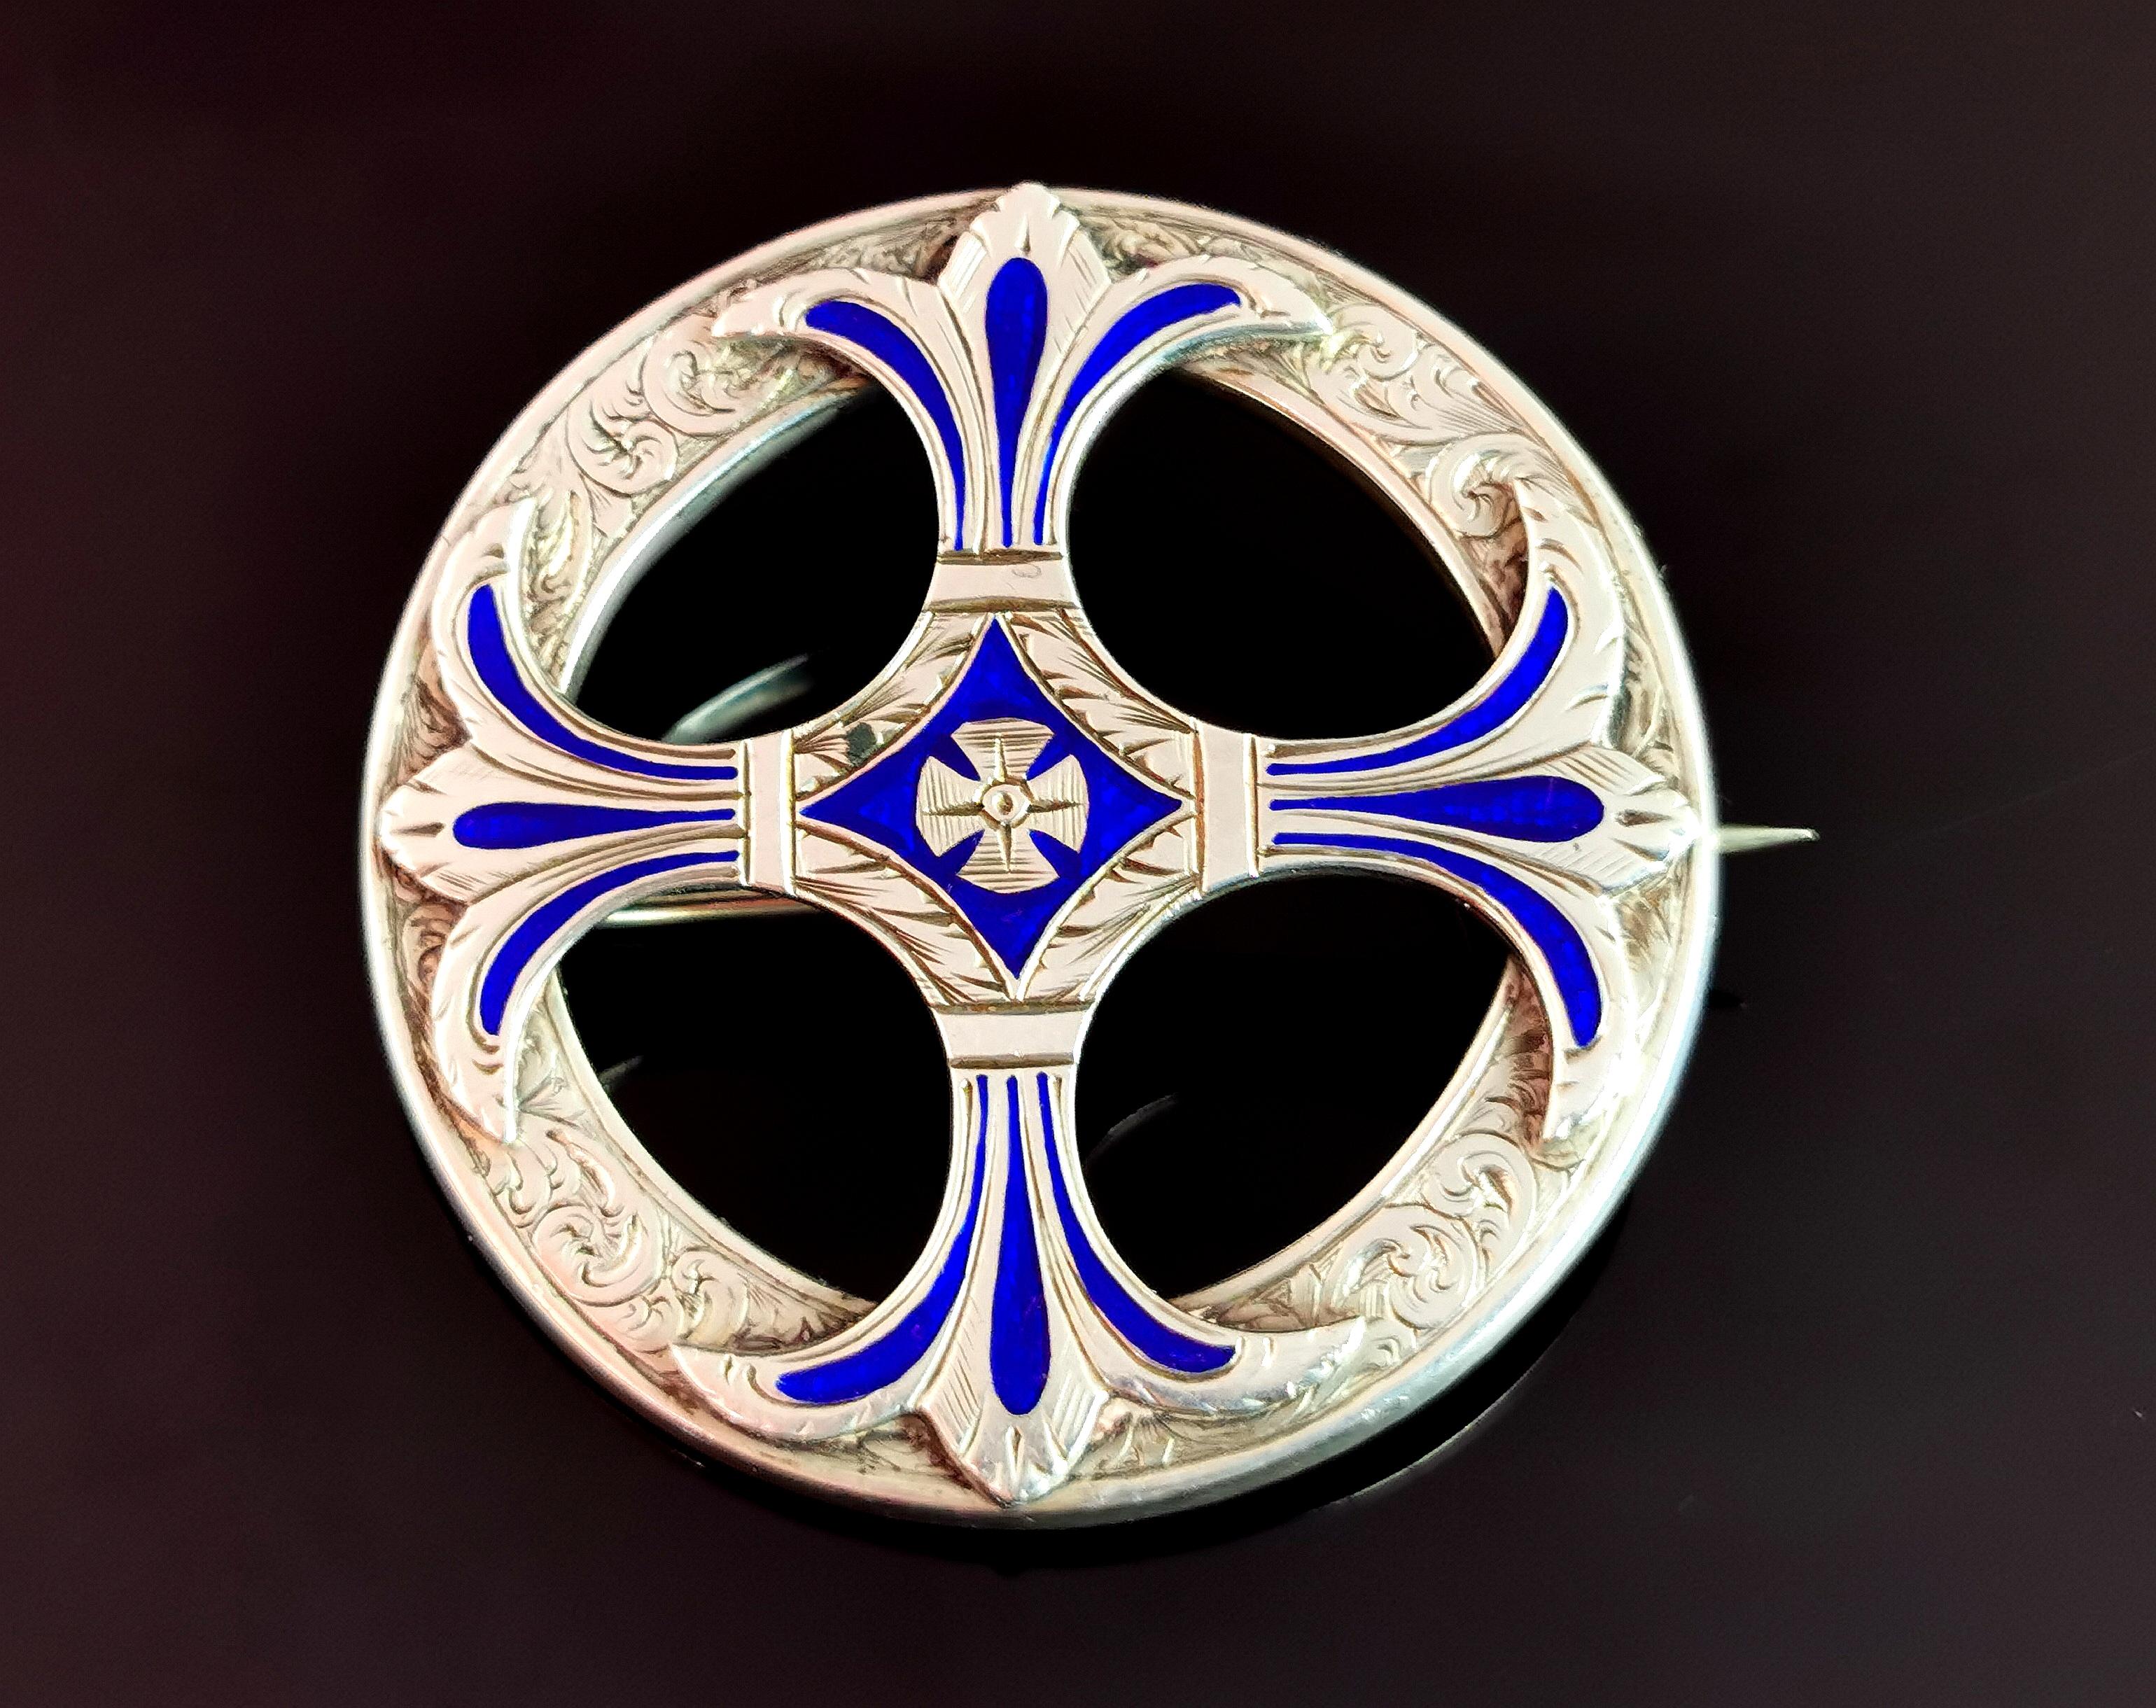 A beautiful and highly detailed antique Scottish sterling silver and cobalt blue enamel brooch or kilt pin.

It is a large sized brooch, circular in shape with a mounted celtic Cross to the centre.

It is heavily engraved all over and has a tudor